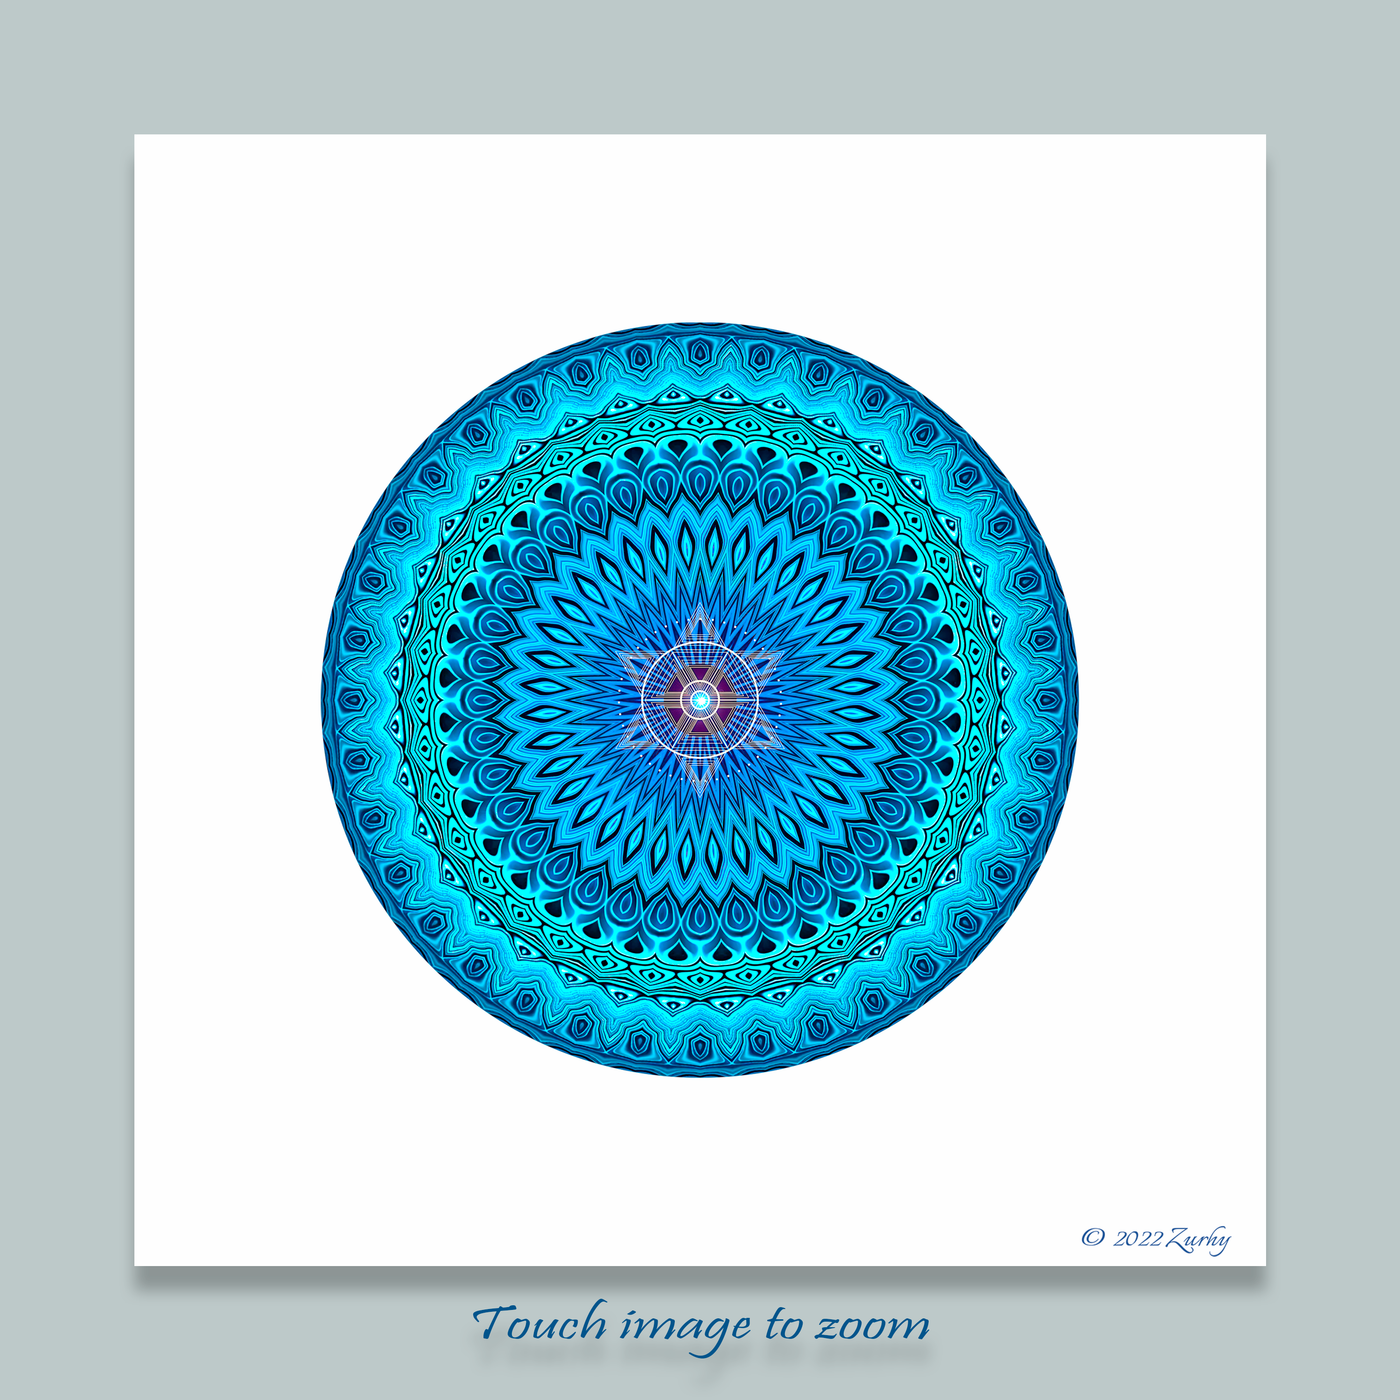 15 - LUX - Giclée Circle Art Print - On 8" x 8" or 12"x12" Satin Luster Paper - Sacred Geometry Symbols of Healing Arts